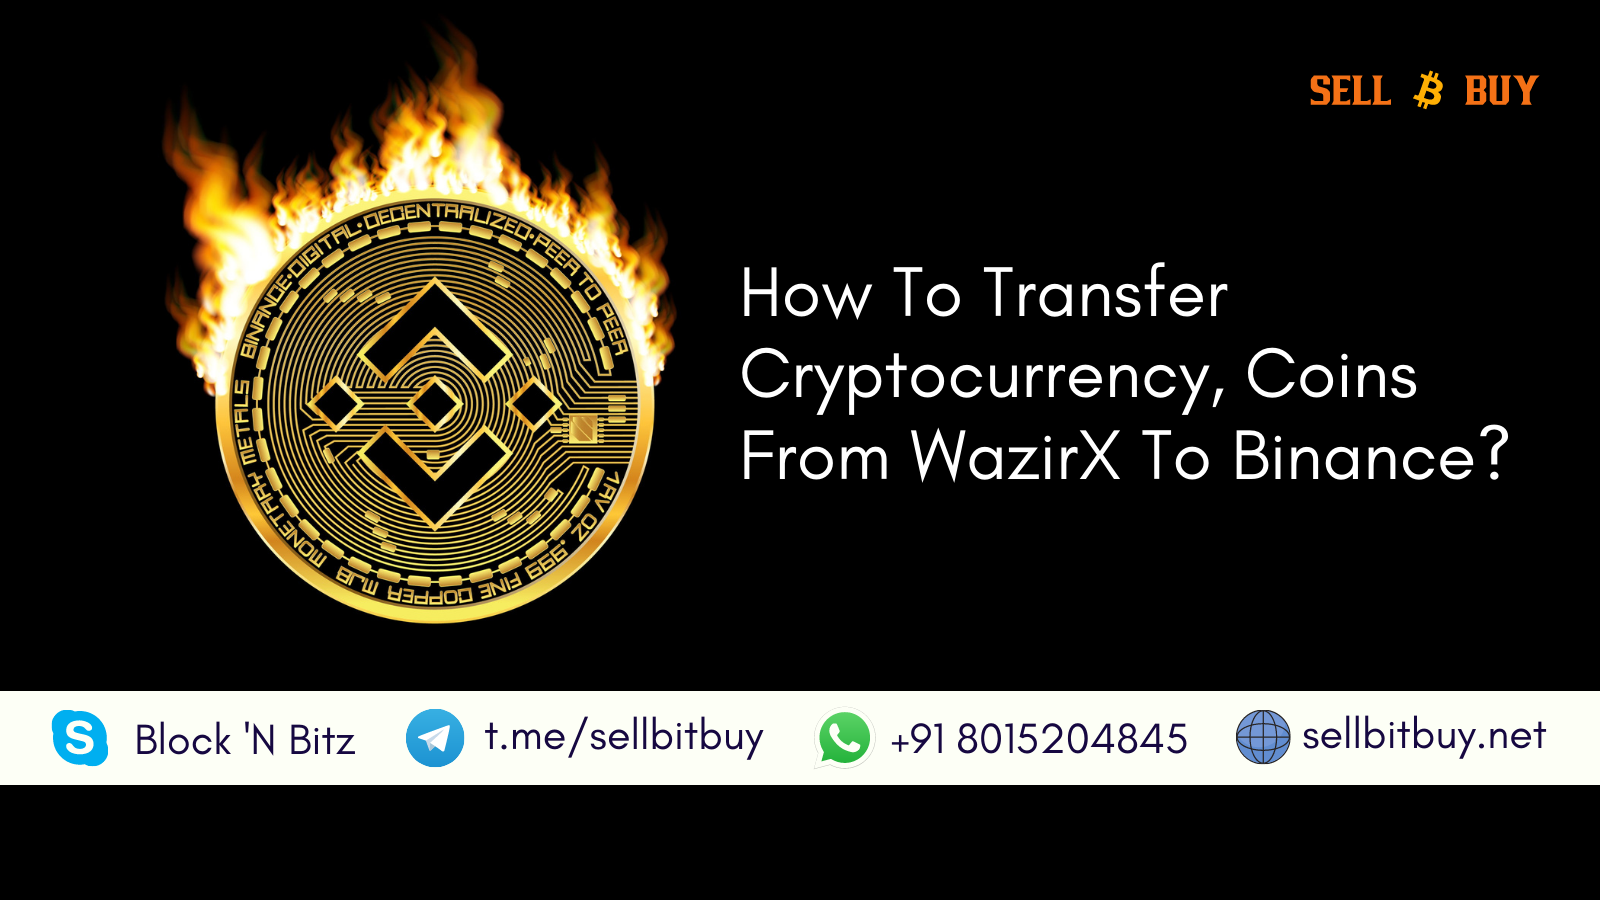 Article about How To Transfer Cryptocurrency, Coins From WazirX To Binance